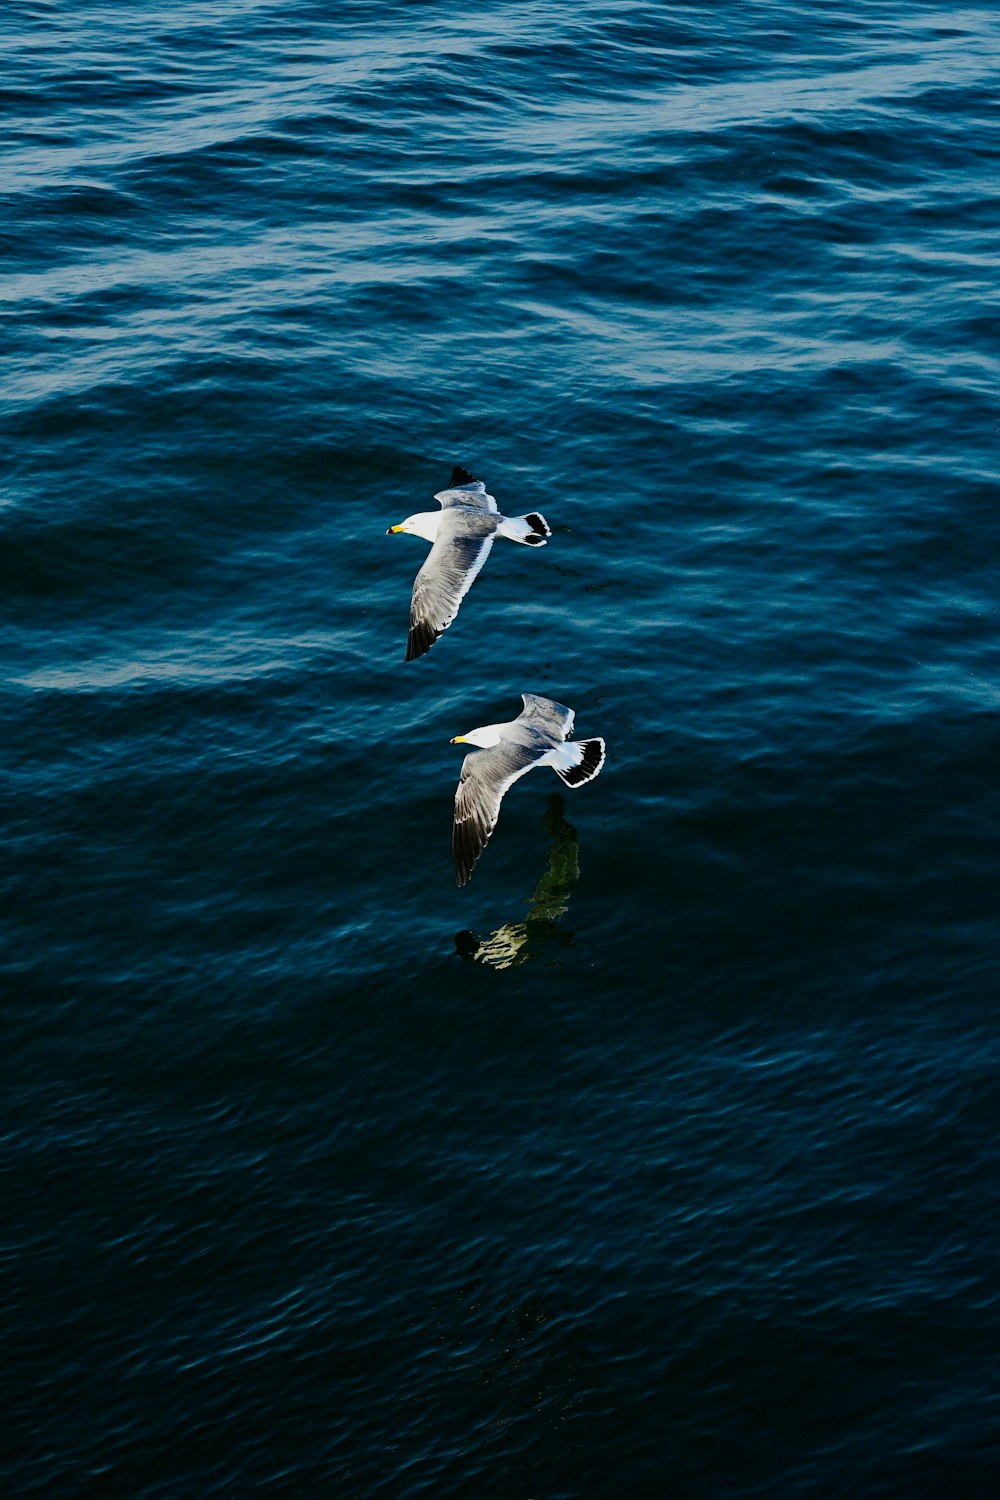 two seagulls flying over the water near each other